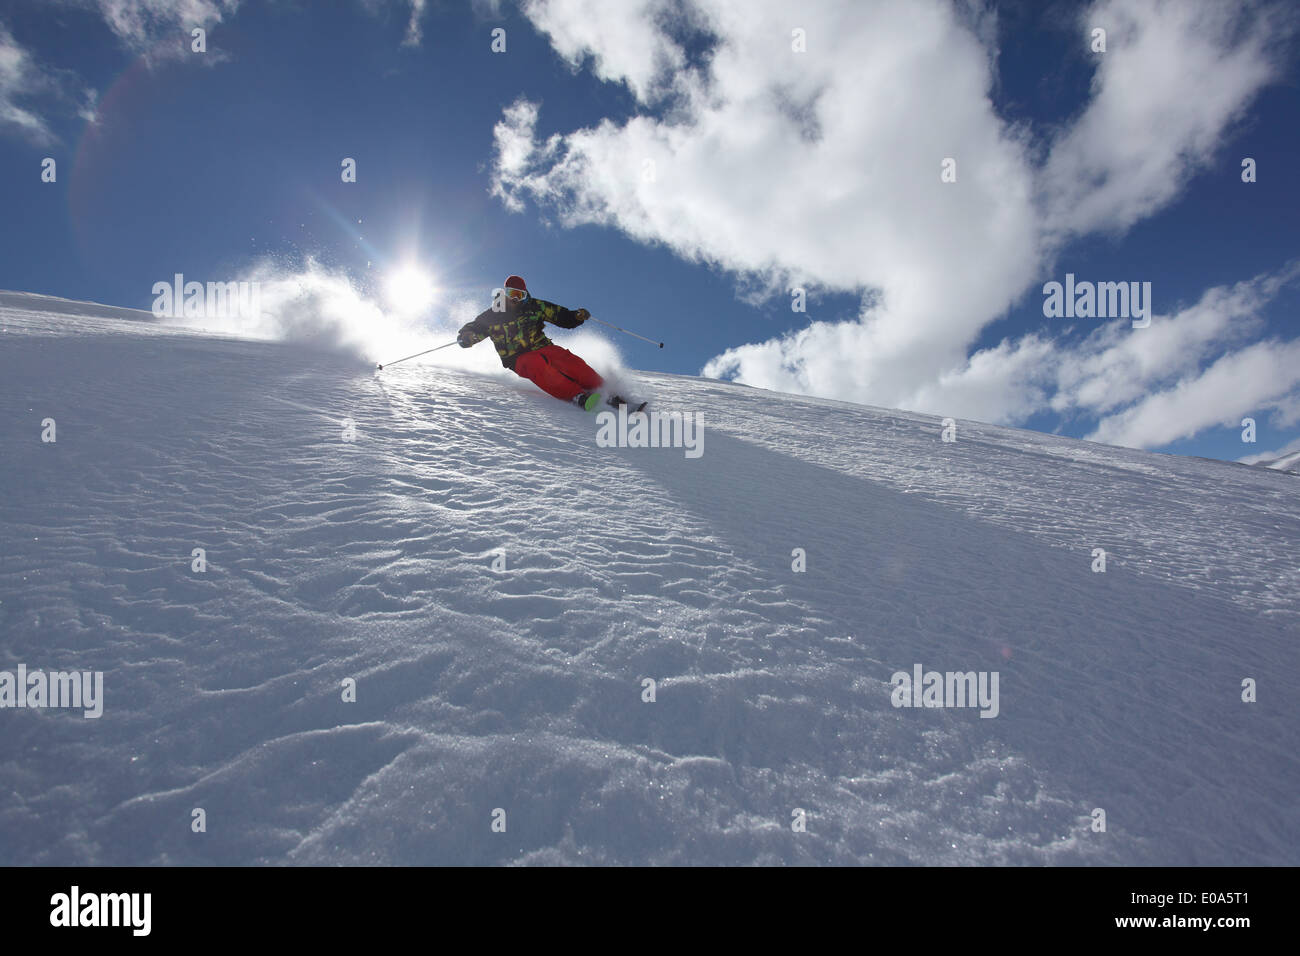 Mid adult man skiing downhill, Mayrhofen, Tyrol, Autriche Banque D'Images